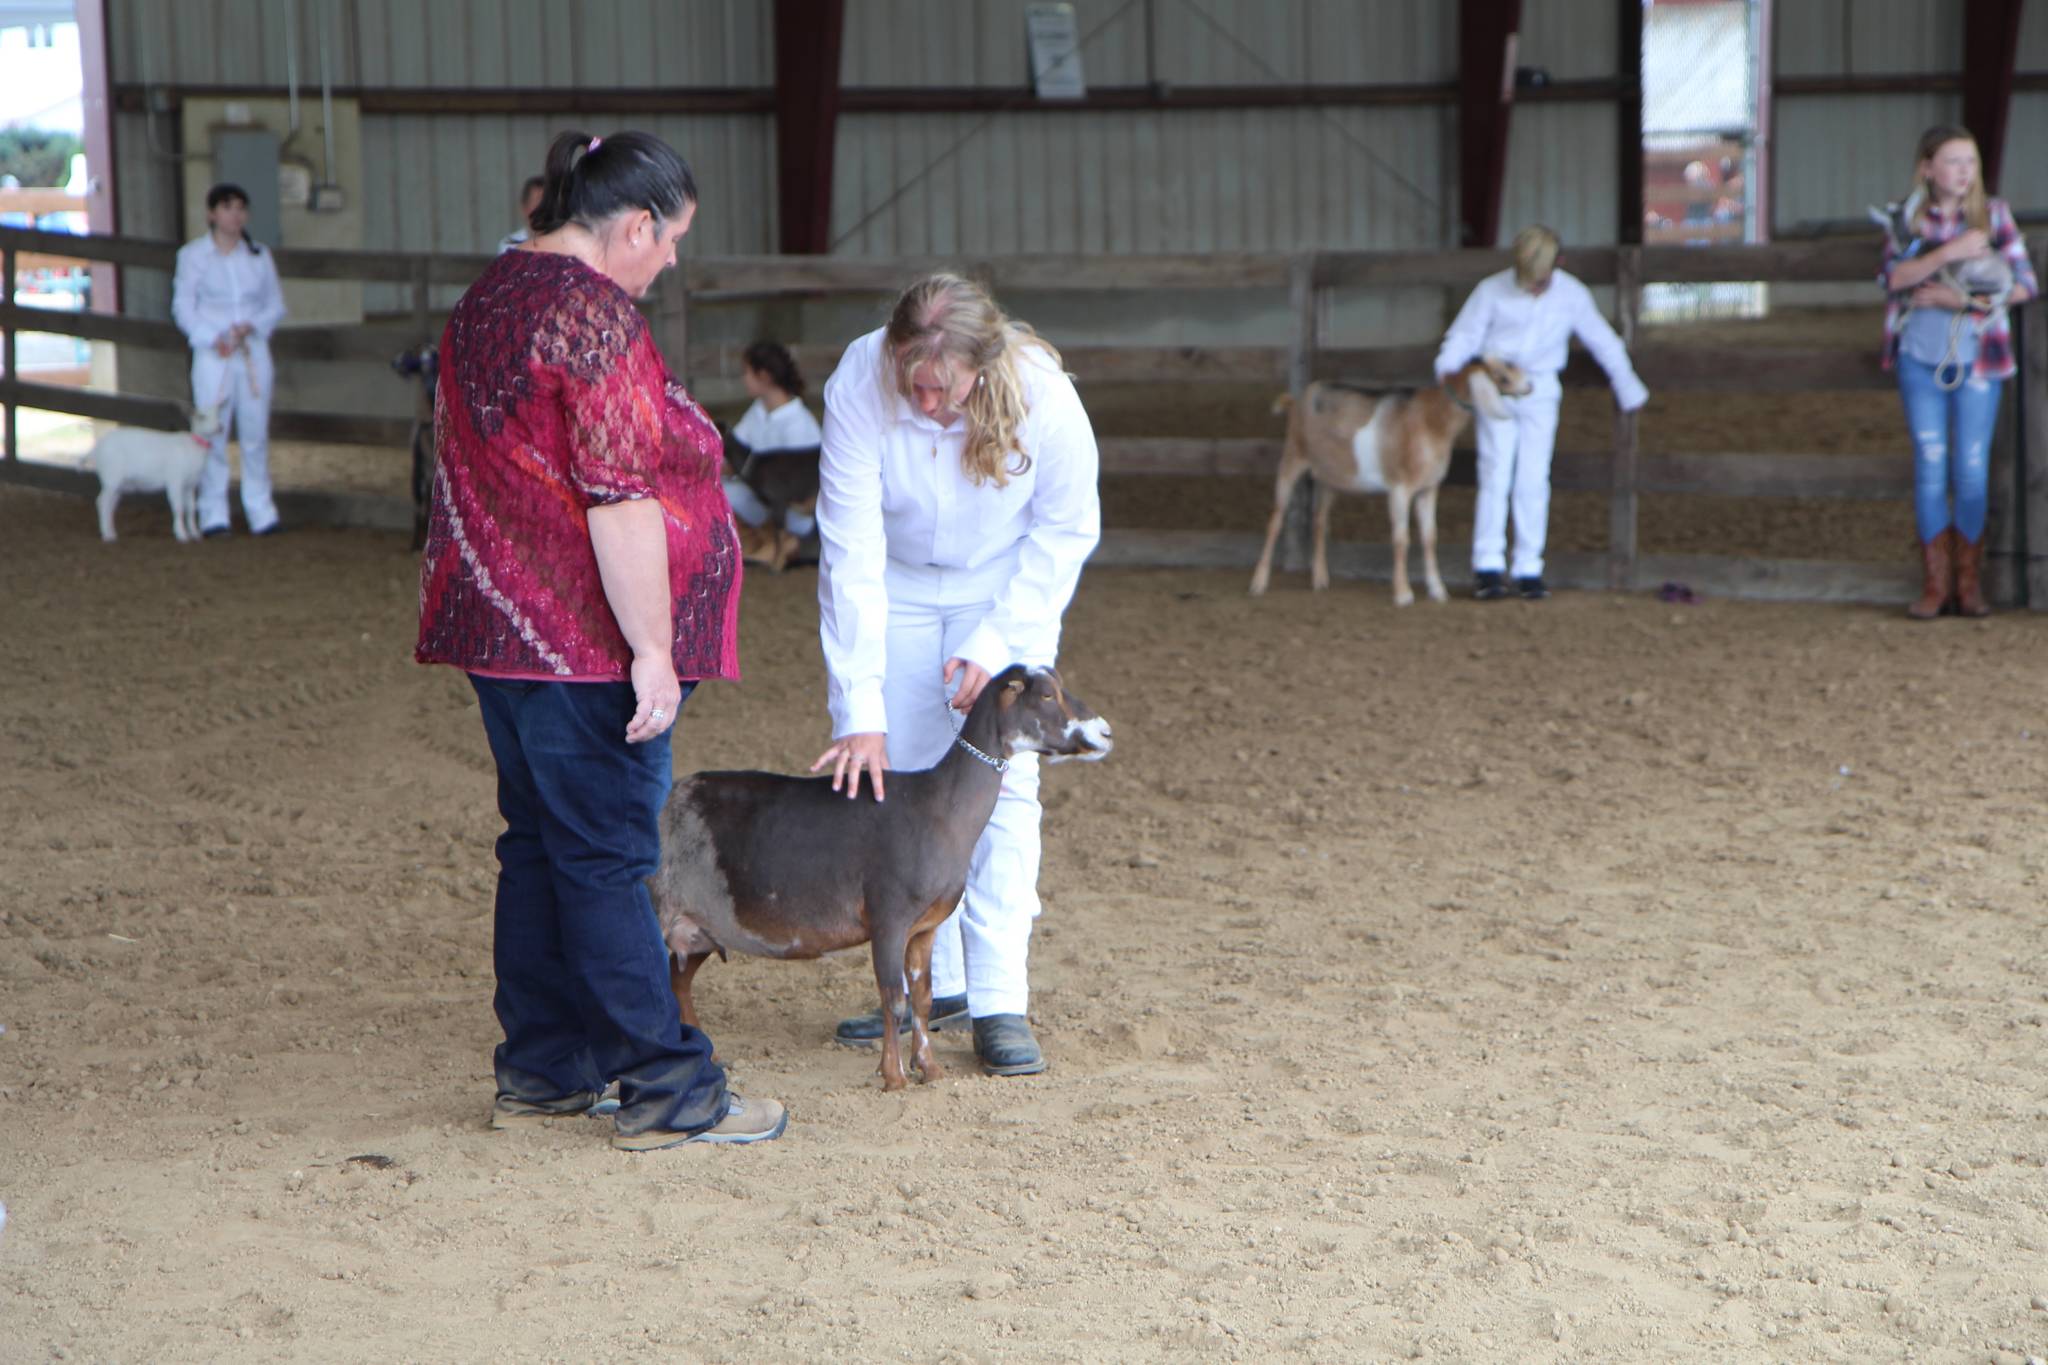 Animal showings continue at the Grays Harbor County Fair in Elma through the weekend.